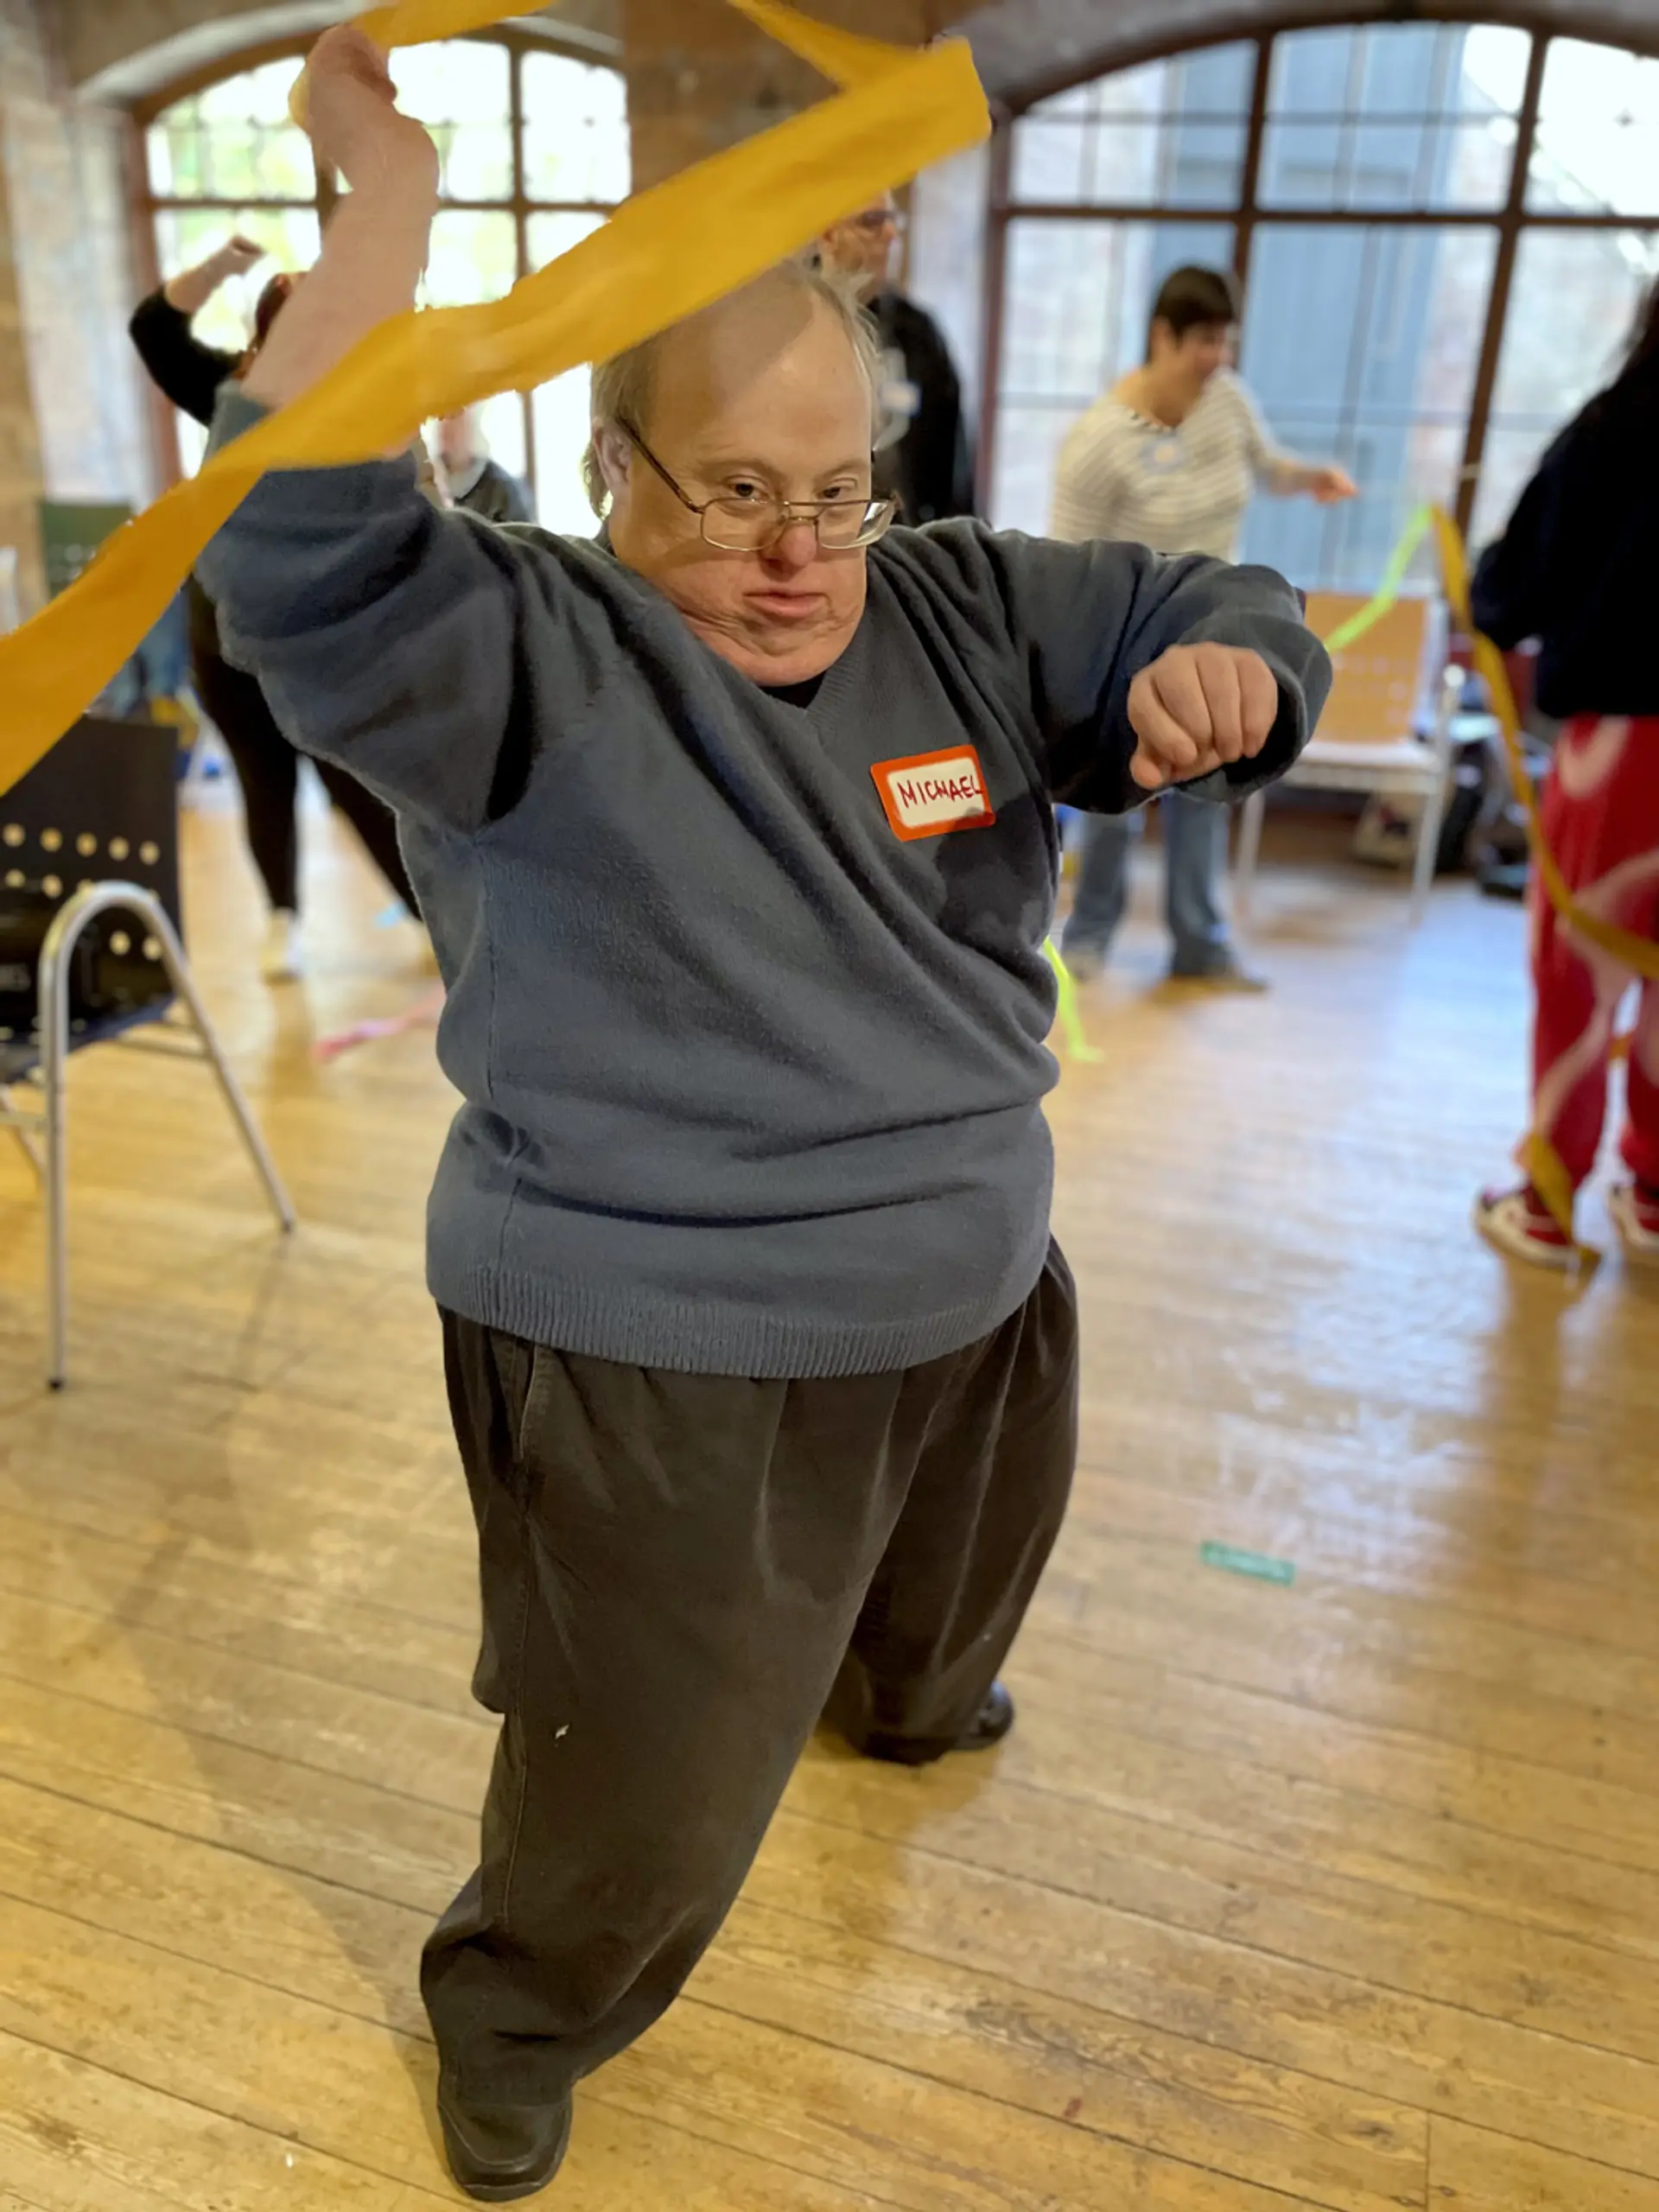 A person with a name tag which says ‘Michael’ on it is at a drama workshop. He wears glasses and has his arm above his head, he is spinning a ribbon attached to the end of a stick to create a spiral shape.